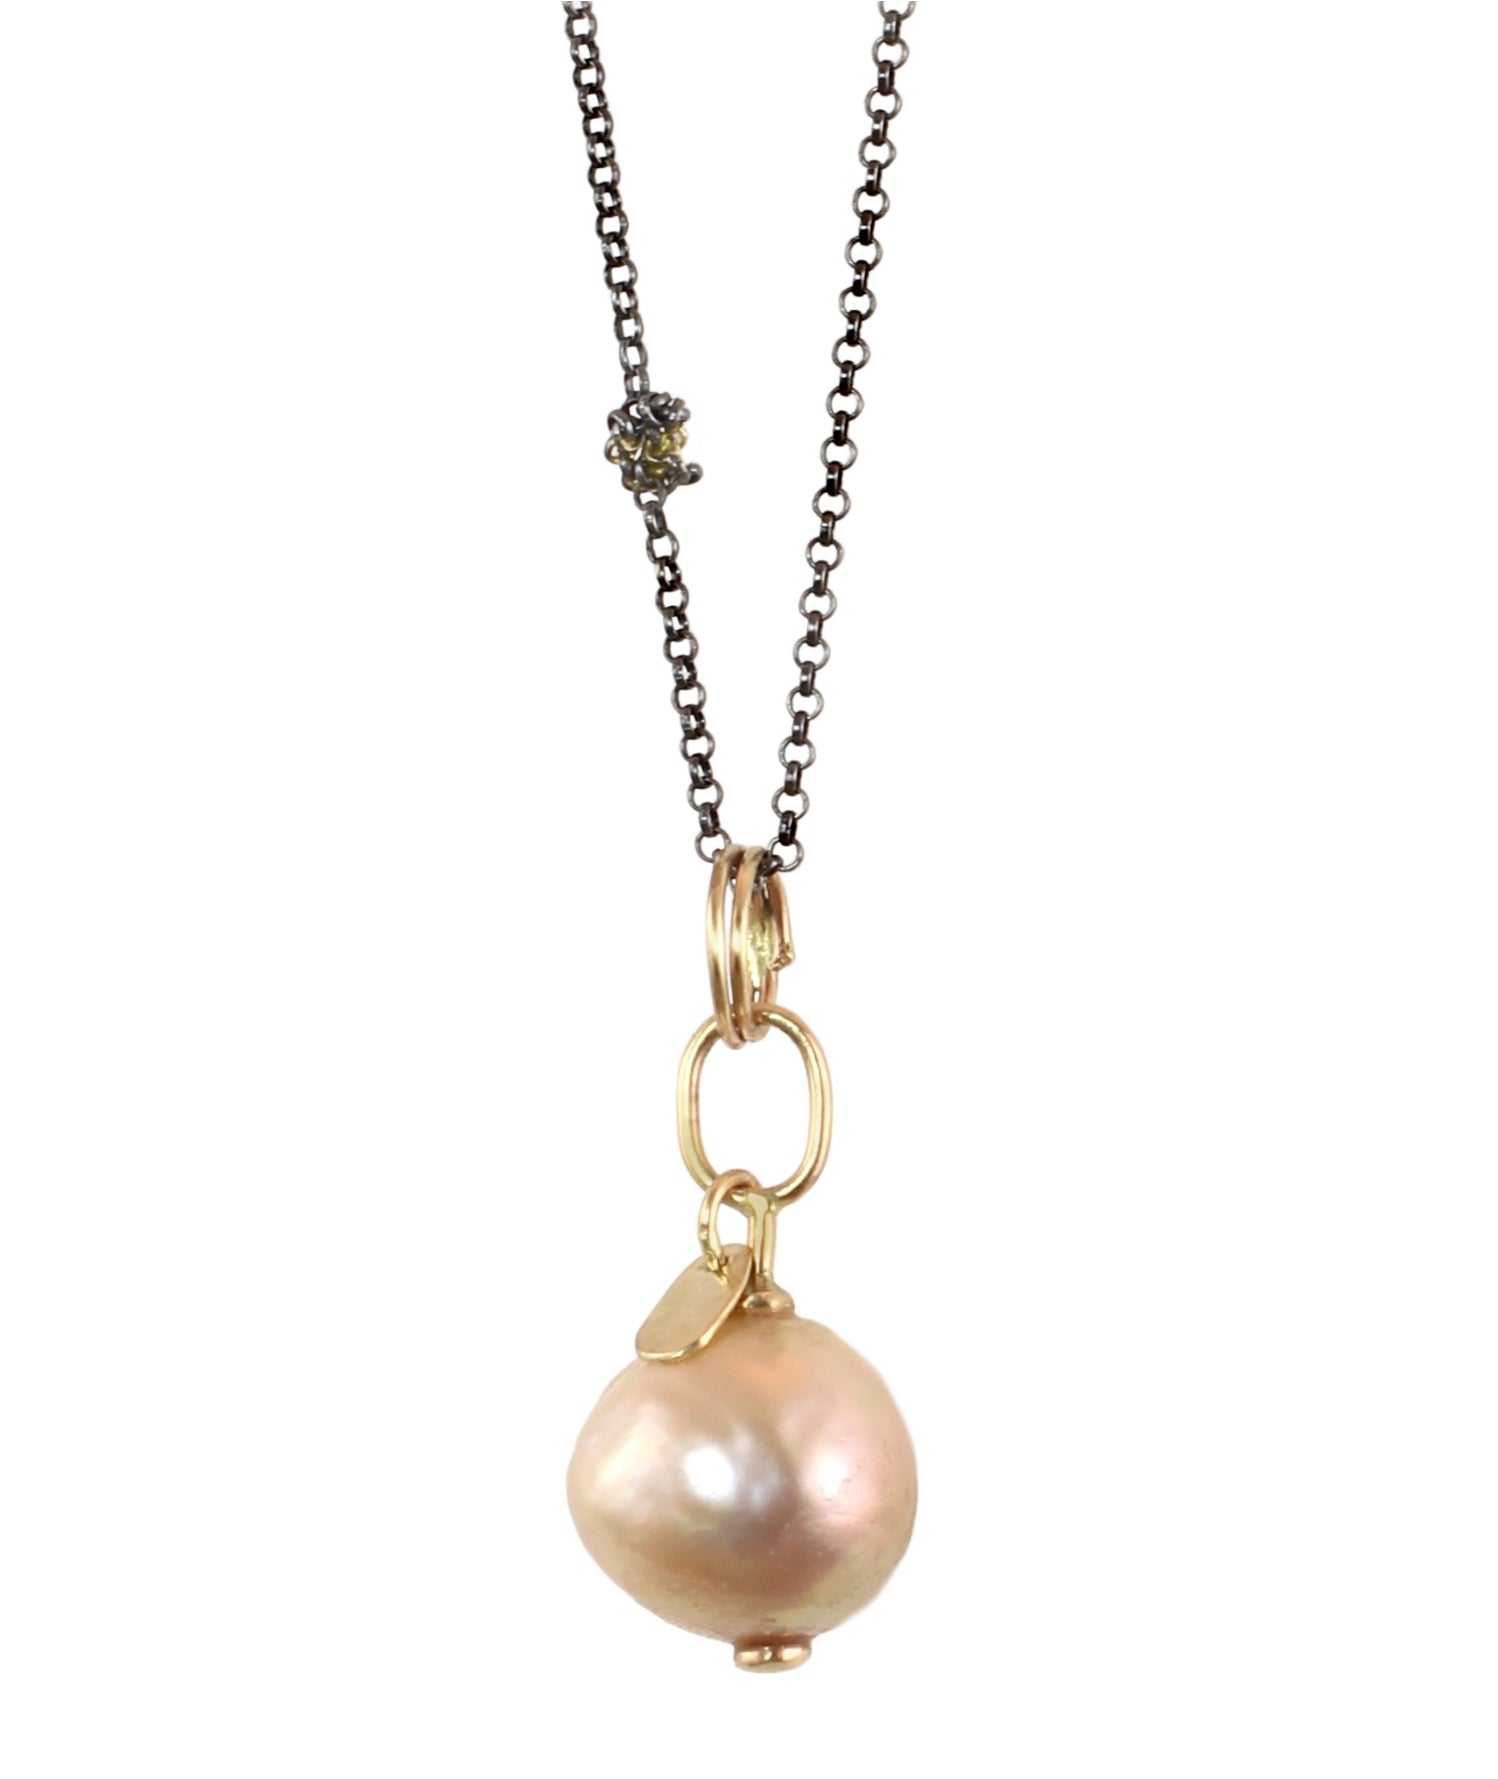 Tangled Pearl Necklace in 14k - Made to Order